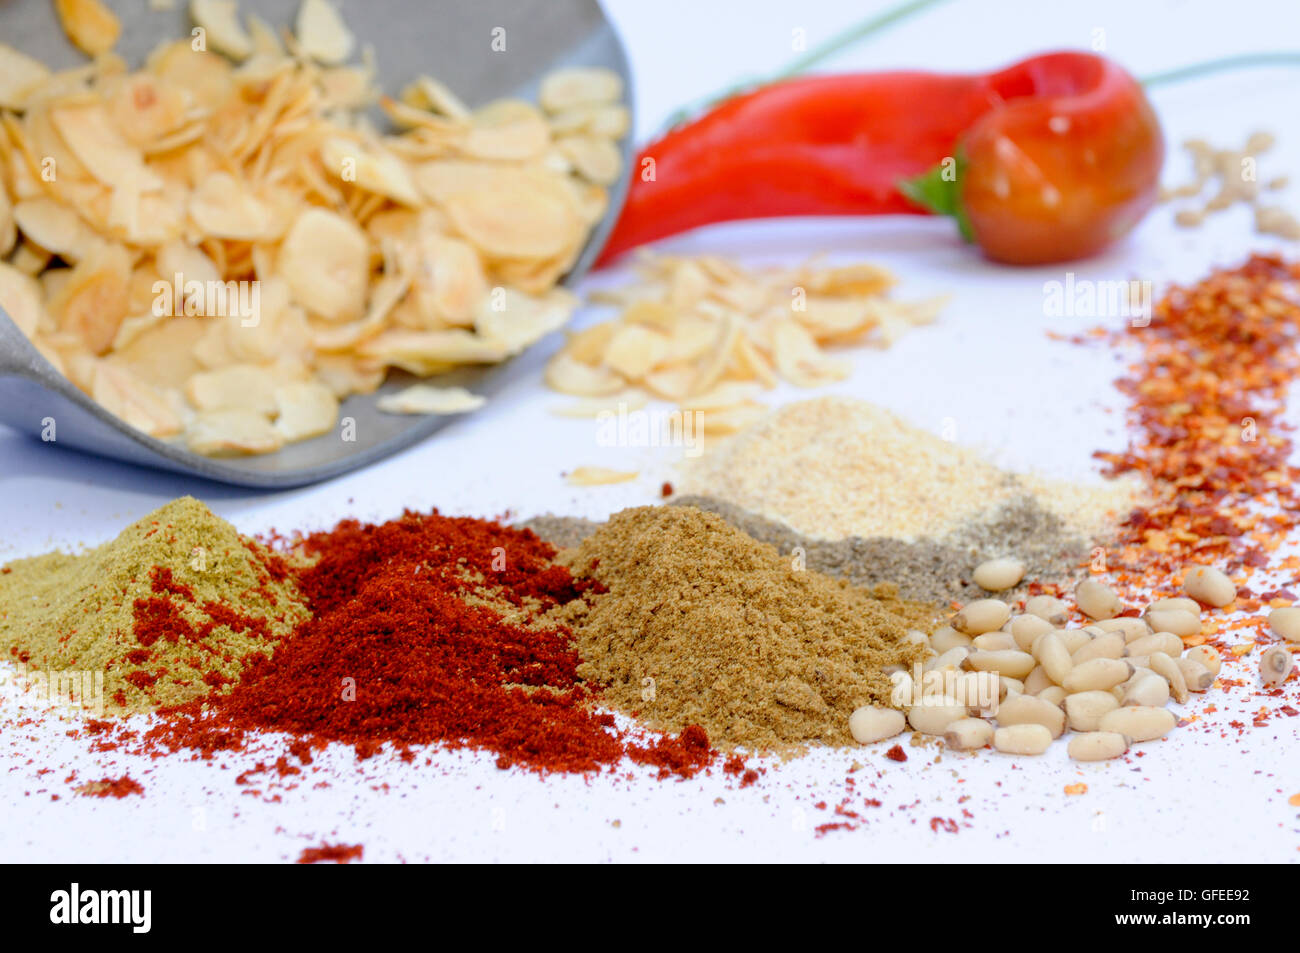 Still life of herbs and spices on white table Stock Photo